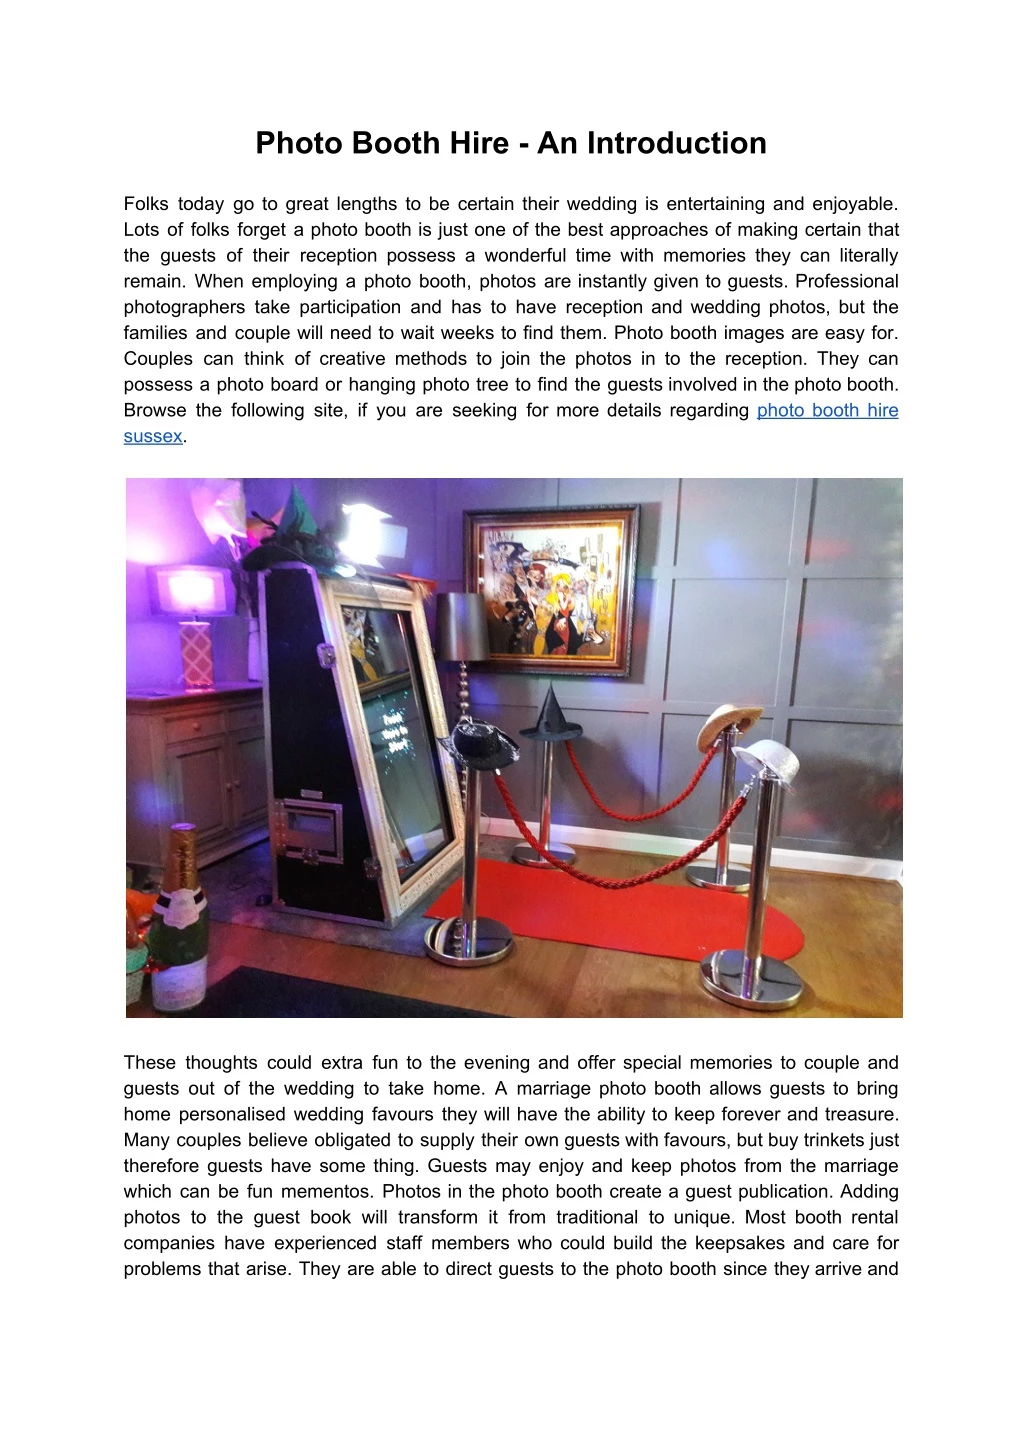 photo booth hire an introduction